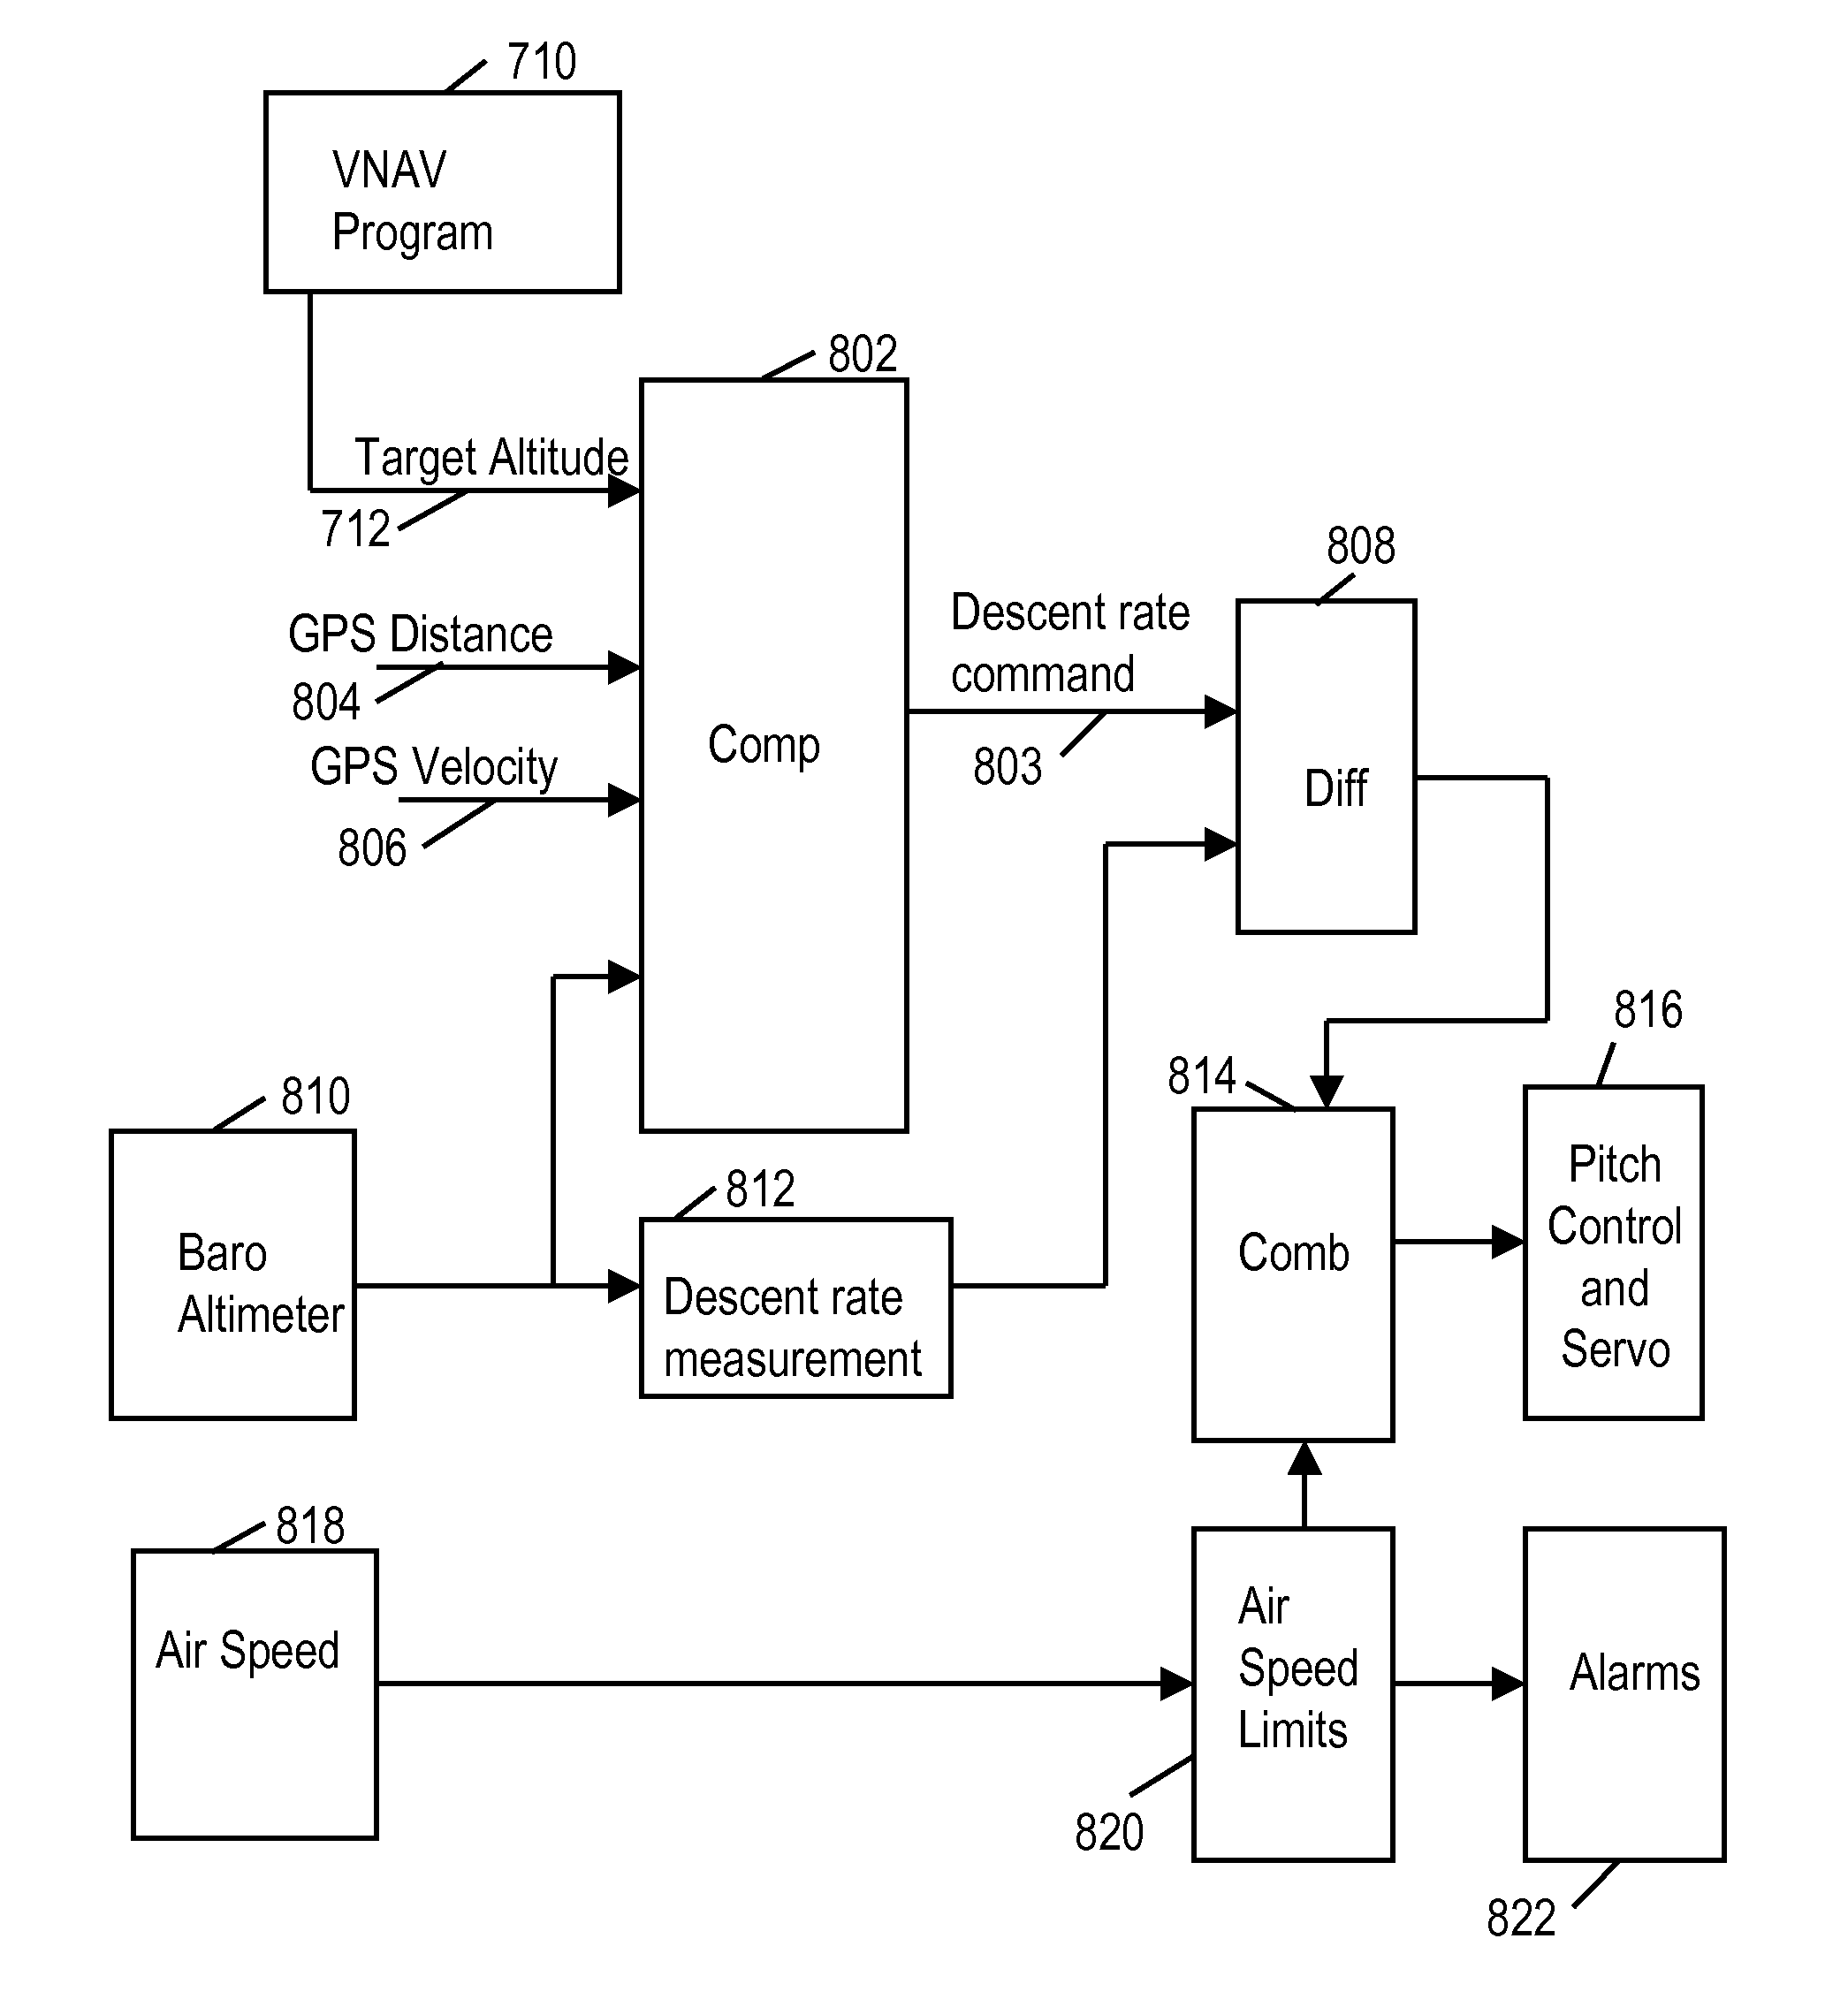 System and method for vertical navigation based on GPS waypoints and autopilot programming